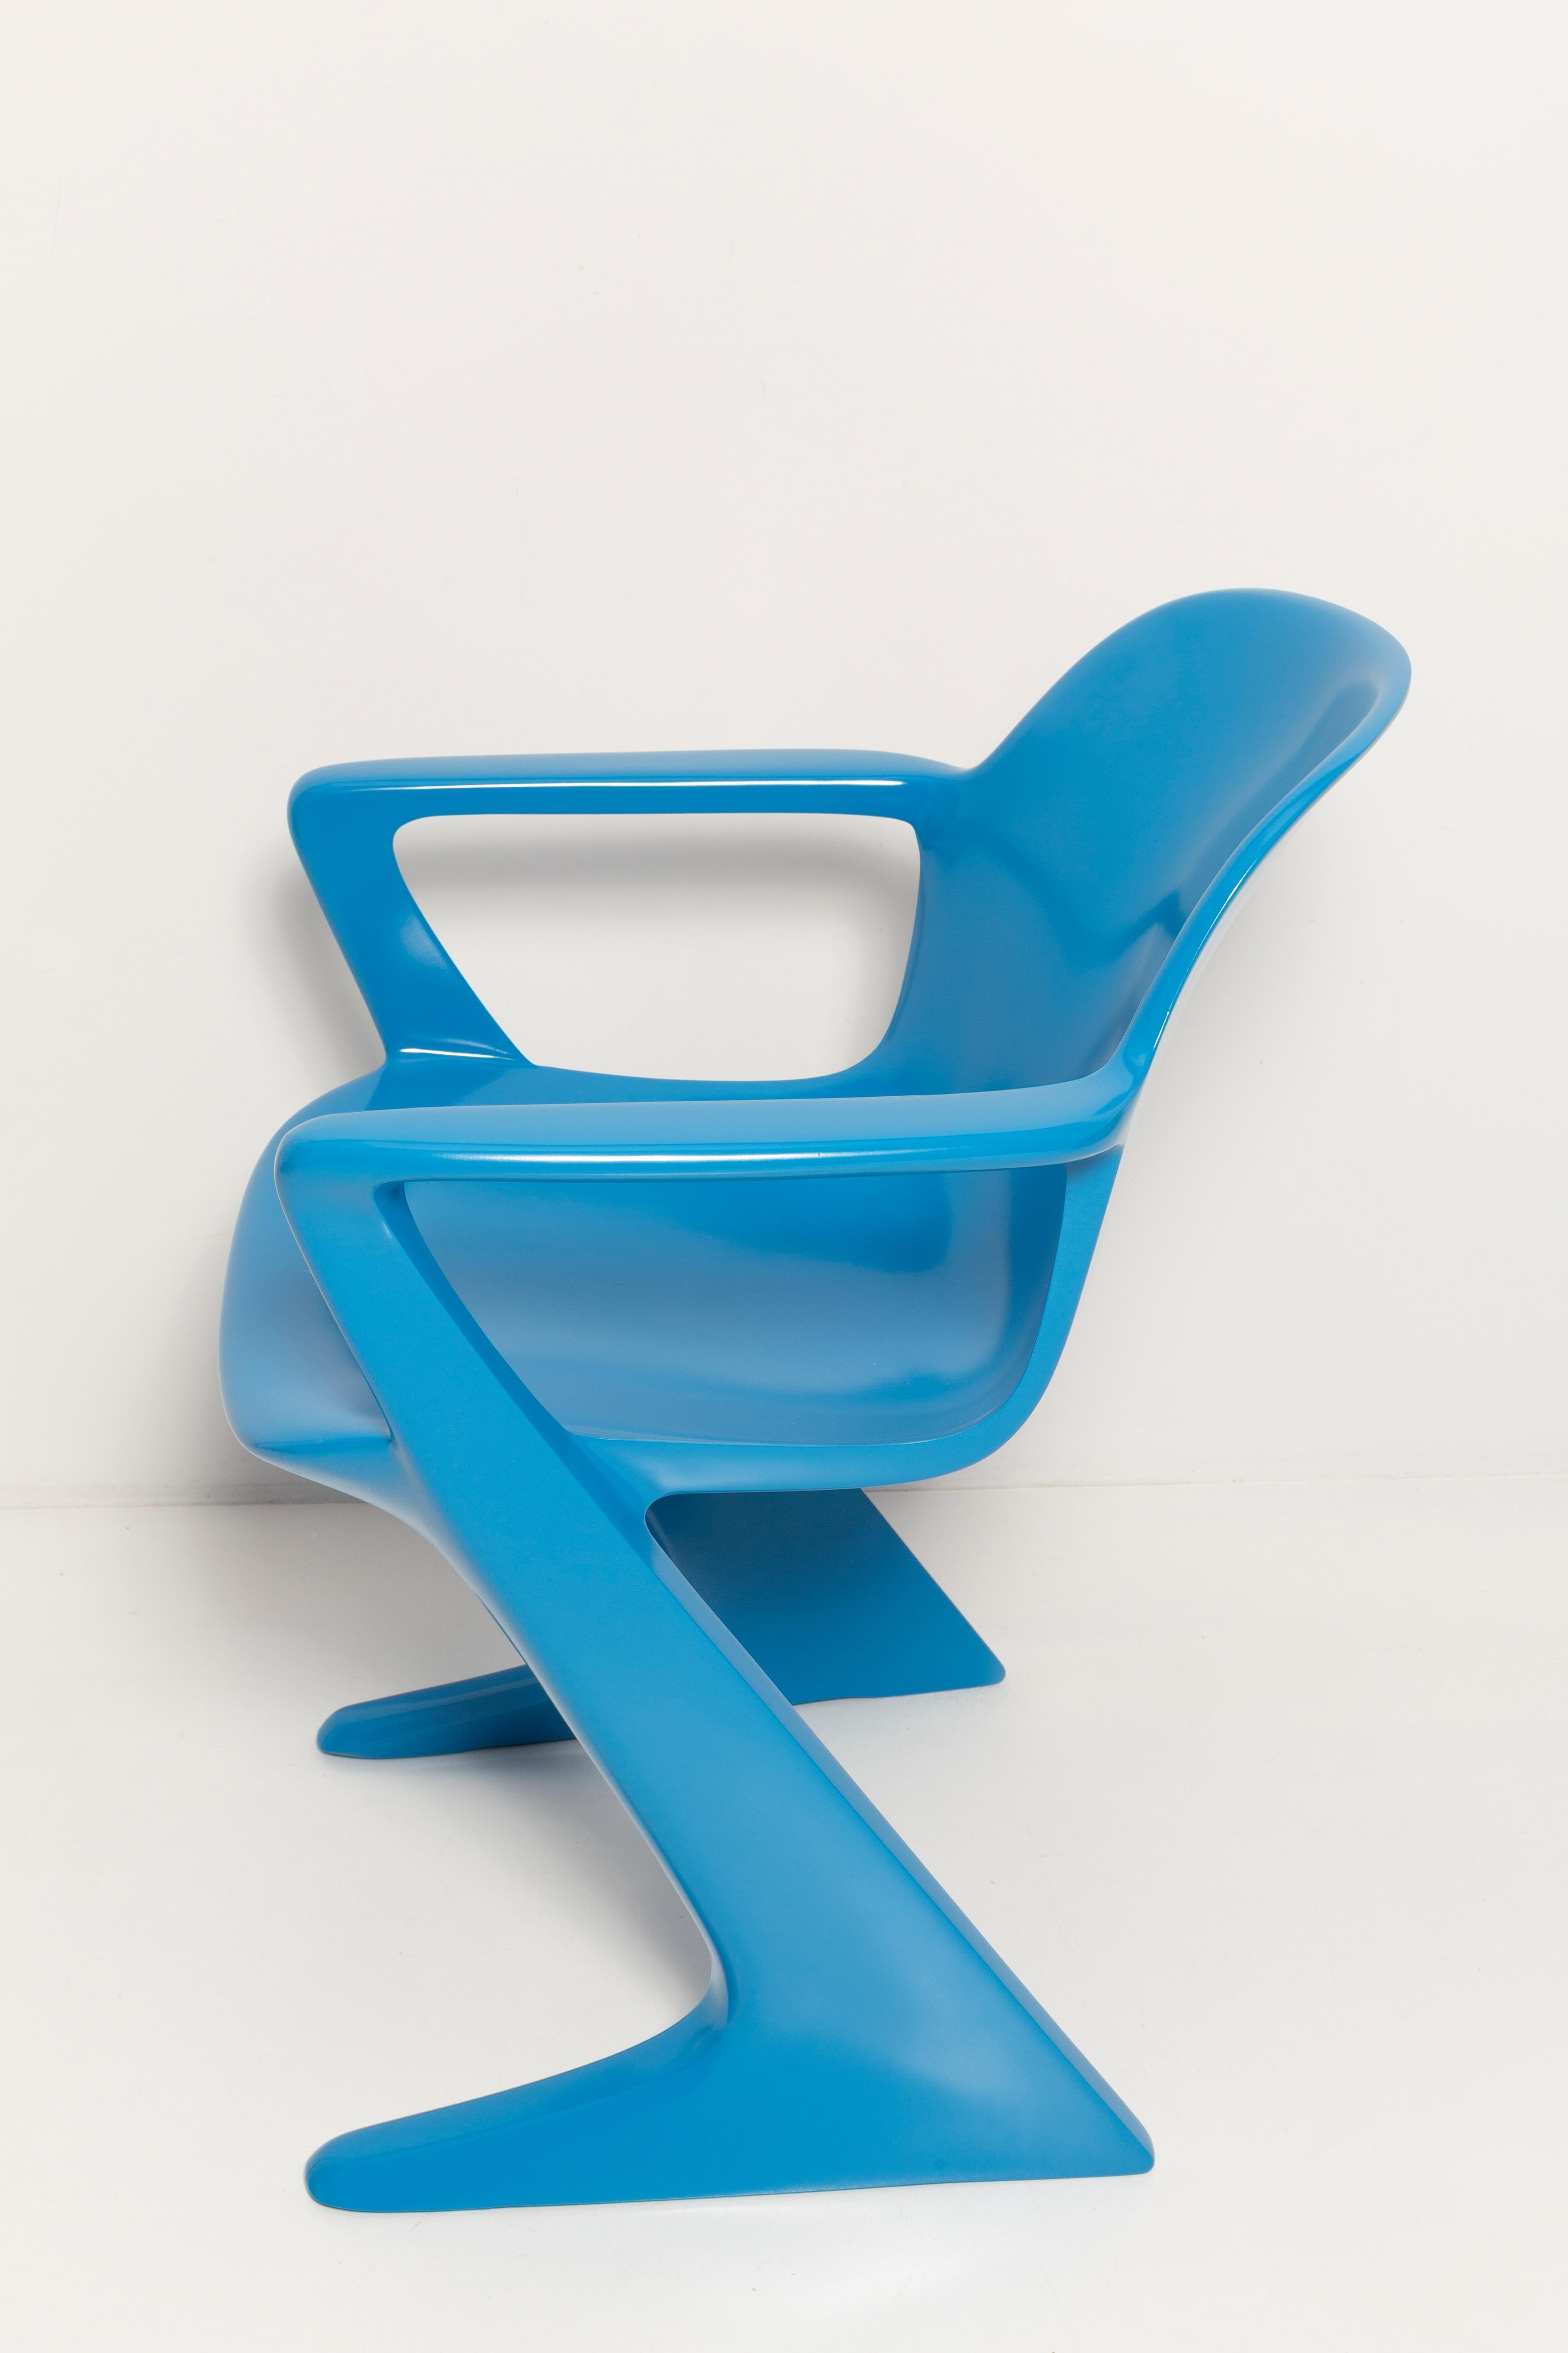 Set of Six Blue Kangaroo Chairs Designed by Ernst Moeckl, Germany, 1960s For Sale 1